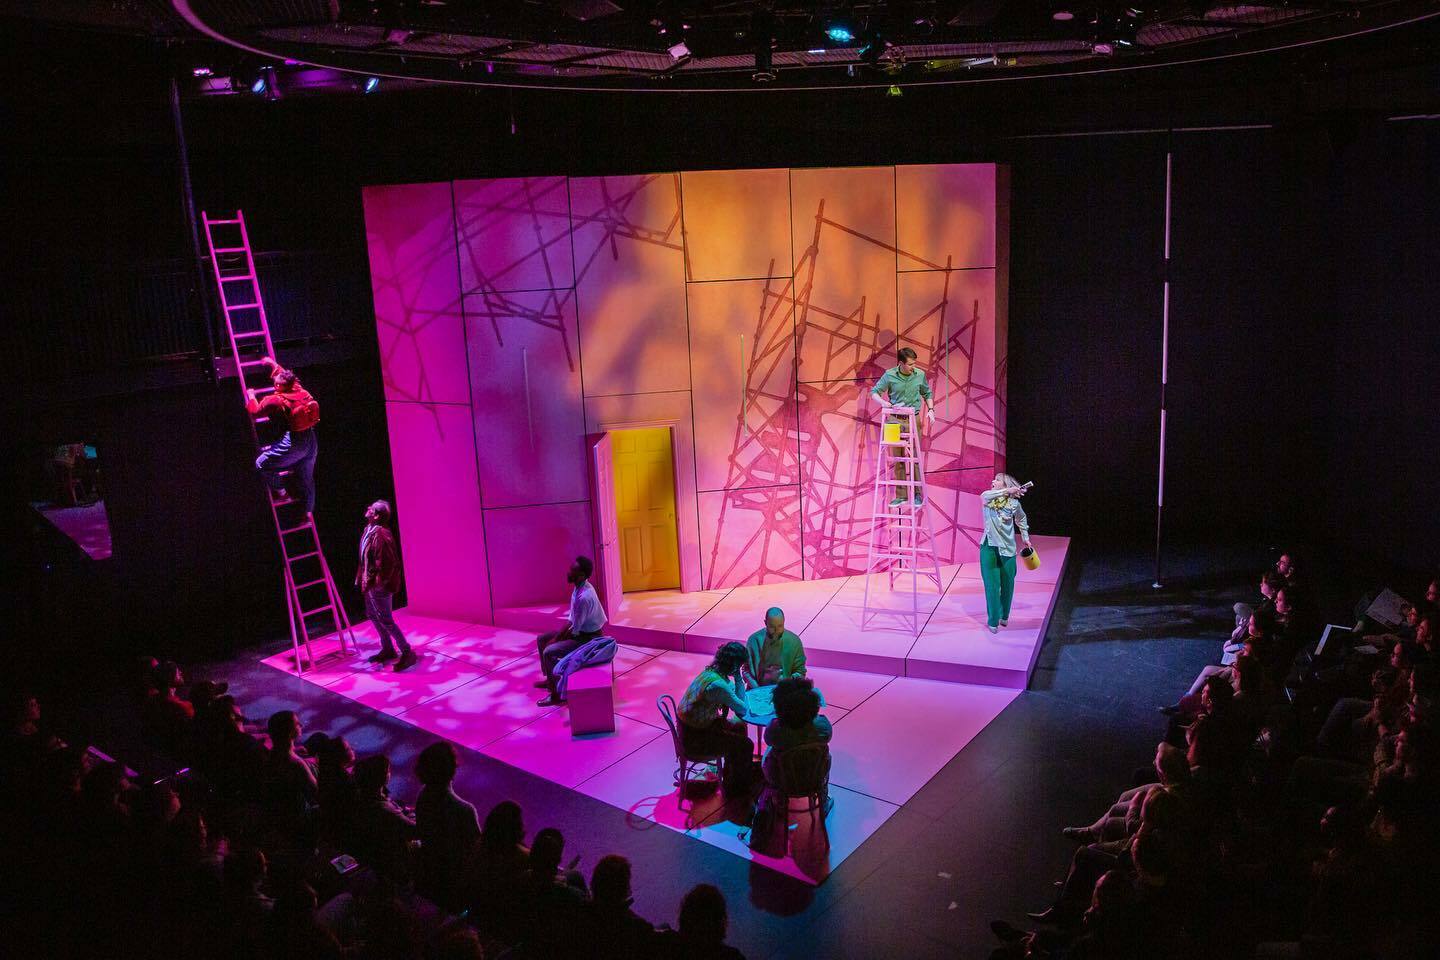 A pink set sits in the middle of an otherwise black and shadowed theater. A ladder leans against railing to the left and a door is in the center of the stage. Several actors are scattered around, standing on the pink floor.